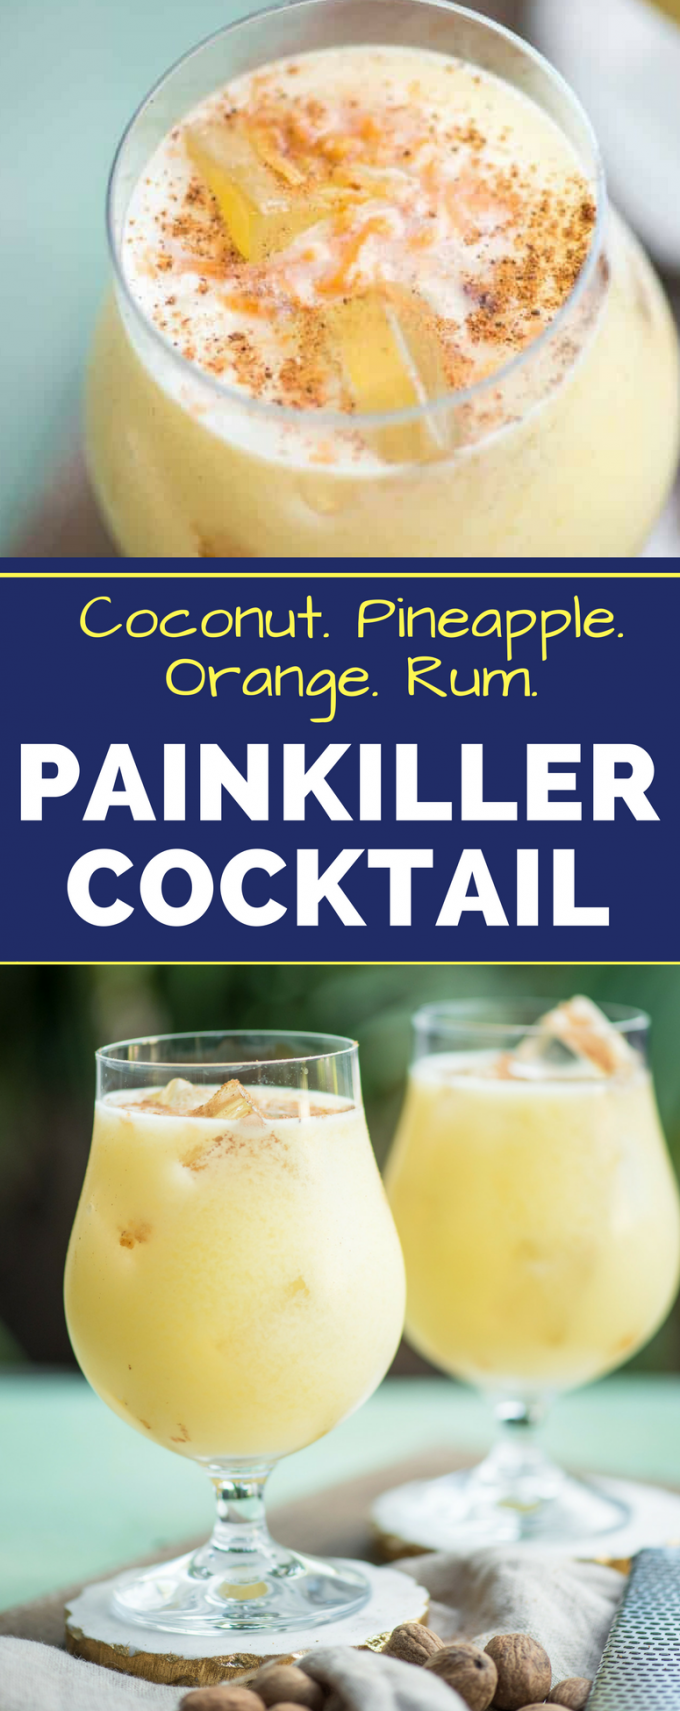 If you're looking for a great warm weather cocktail recipe, make these Painkiller Drinks! With coconut cream, pineapple juice, rum, and orange - what's not to love? #virginislands #painkillercocktail #easycocktailrecipes #summercocktails #gogogogourmet via @gogogogourmet